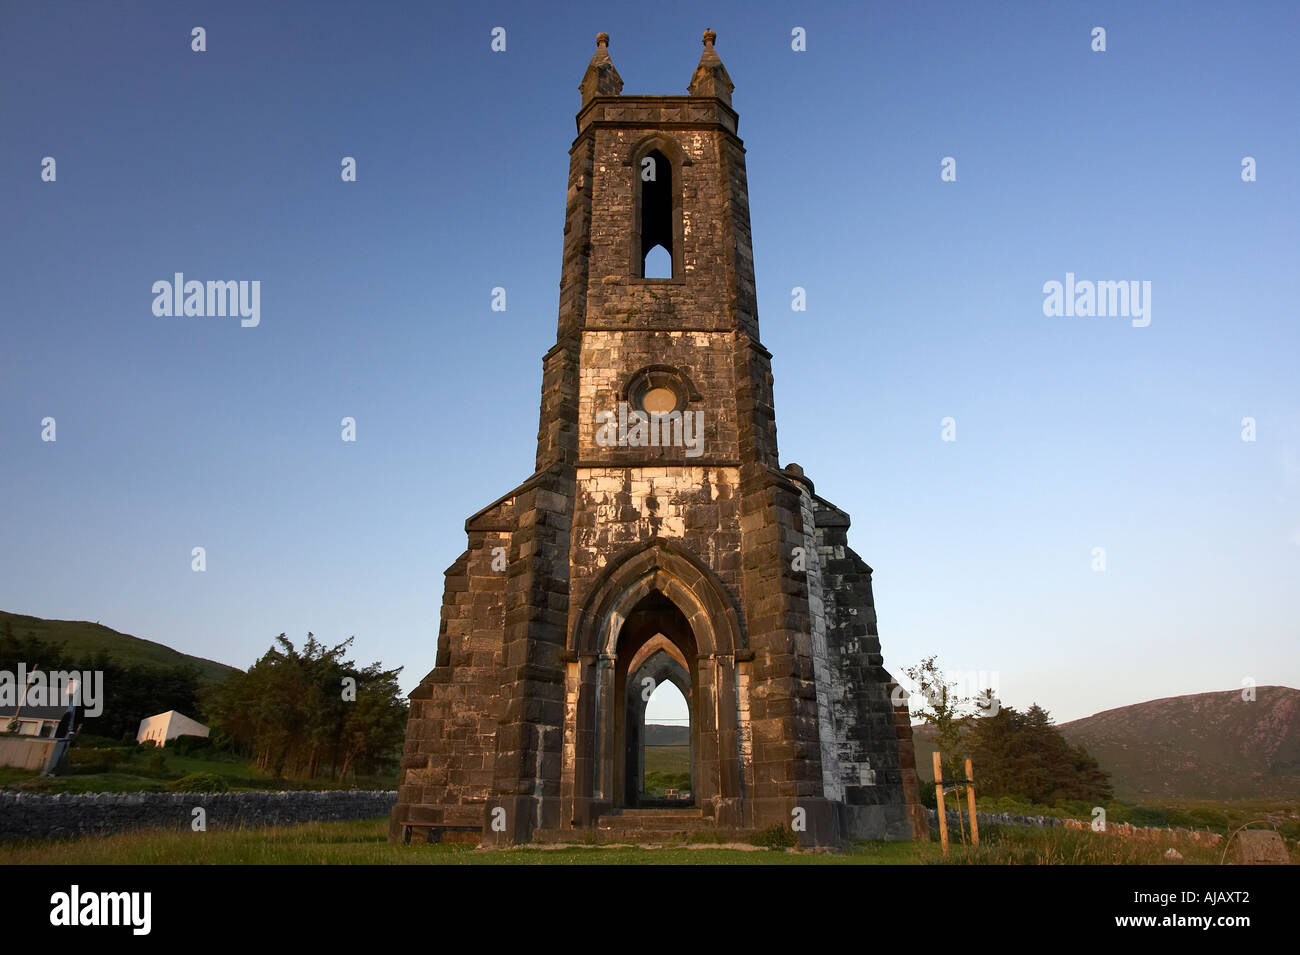 dunlewey church of ireland protestant church at sunset Dunlewy county Donegal Republic of Ireland Stock Photo